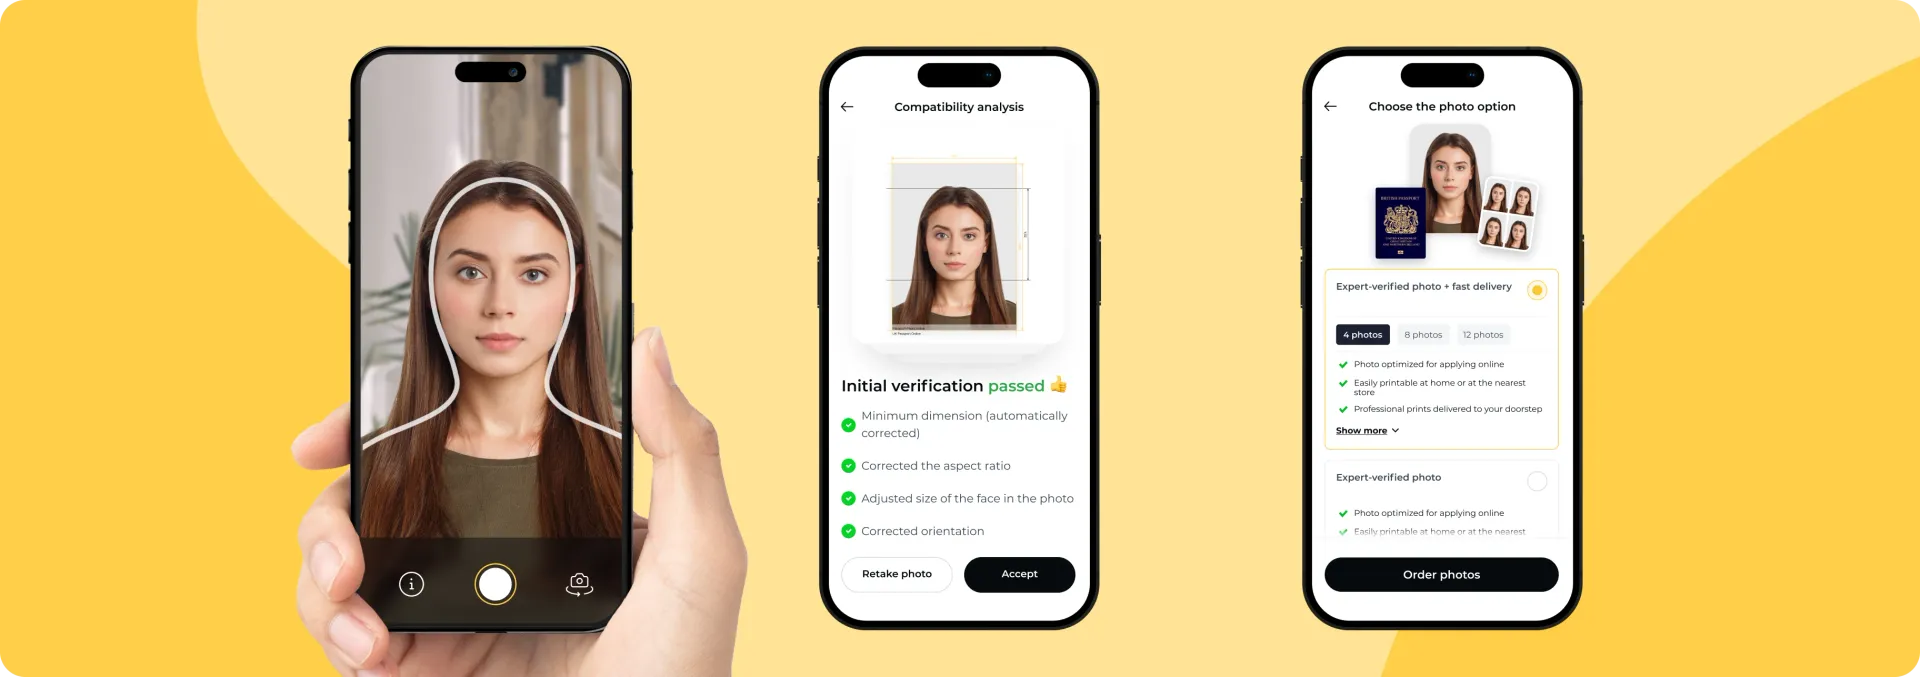 Screenshots explaining how to get a digital passport photo in three steps using PhotoAiD®, a passport photo service for taking compliant ID photos.